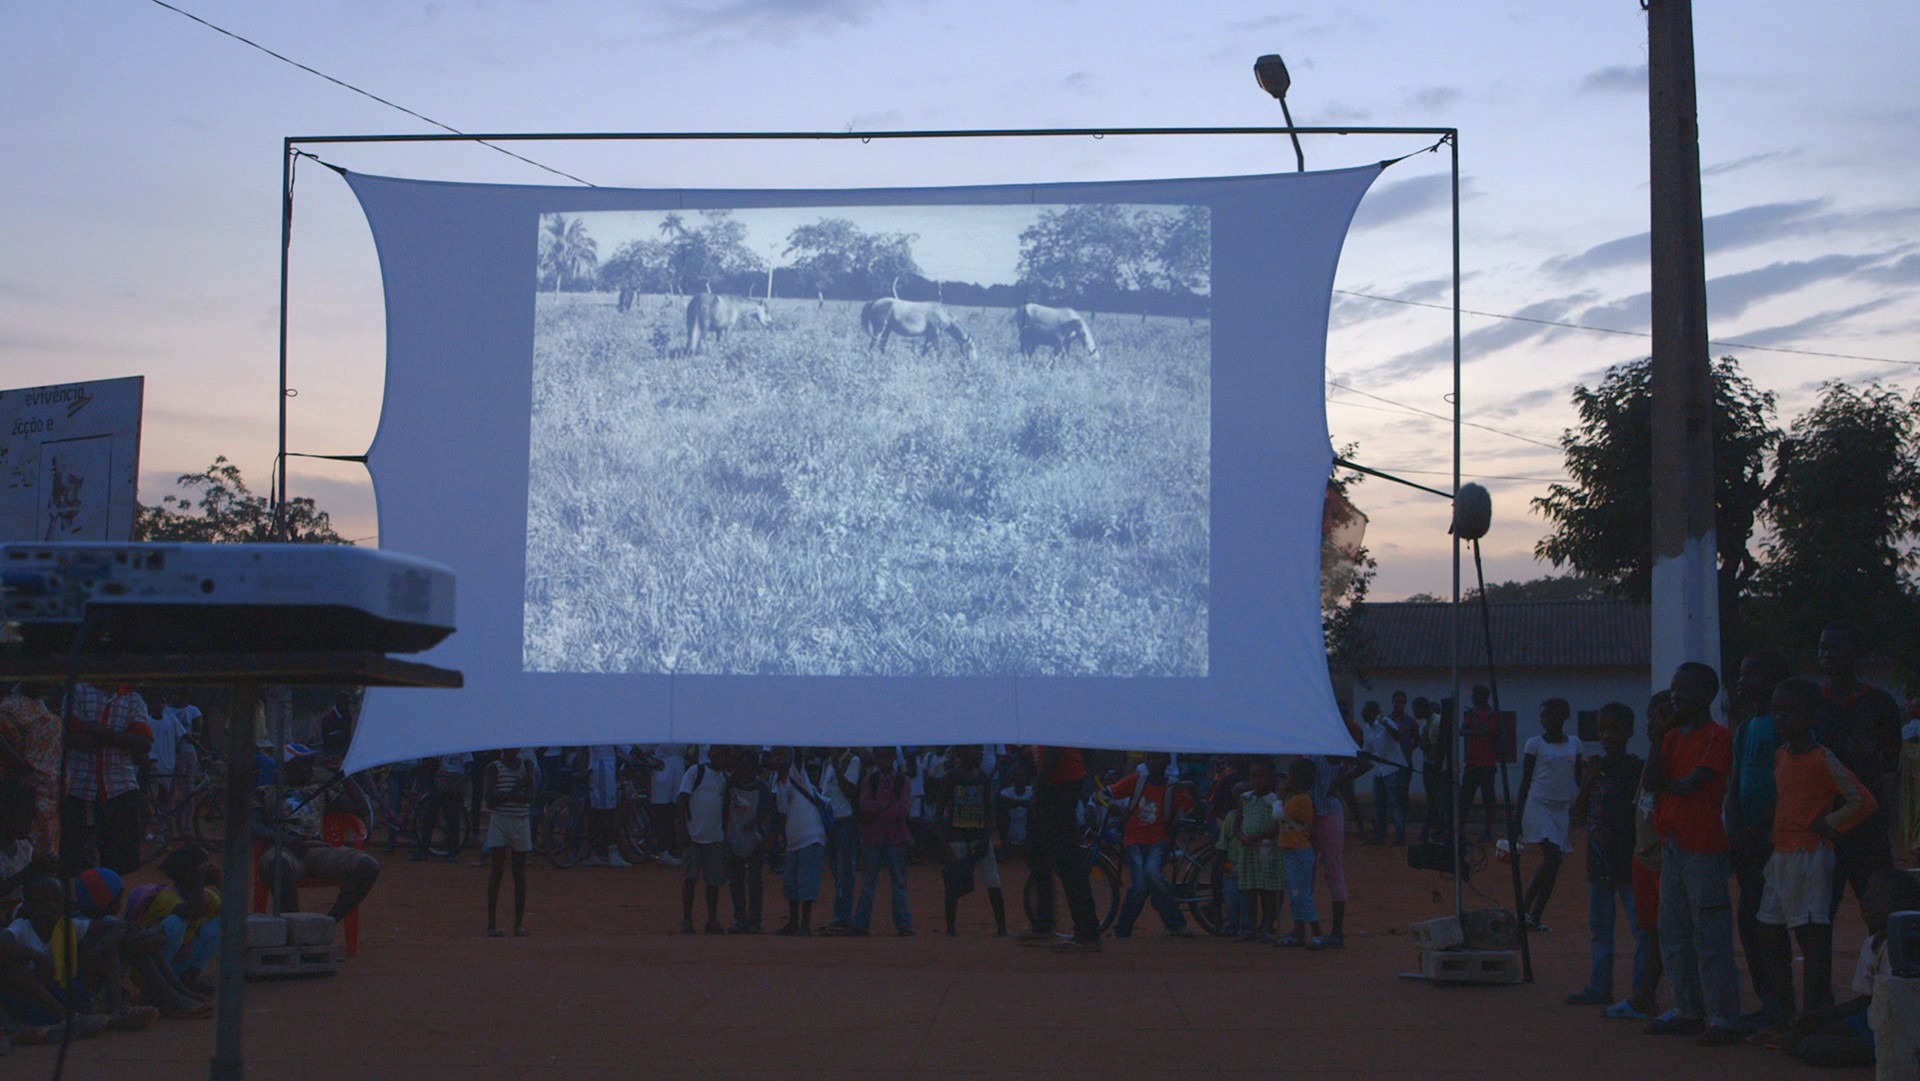 A large projector sheet strung up in an outdoor setting with people standing around, and depicting, in black and white, horses in long grass.